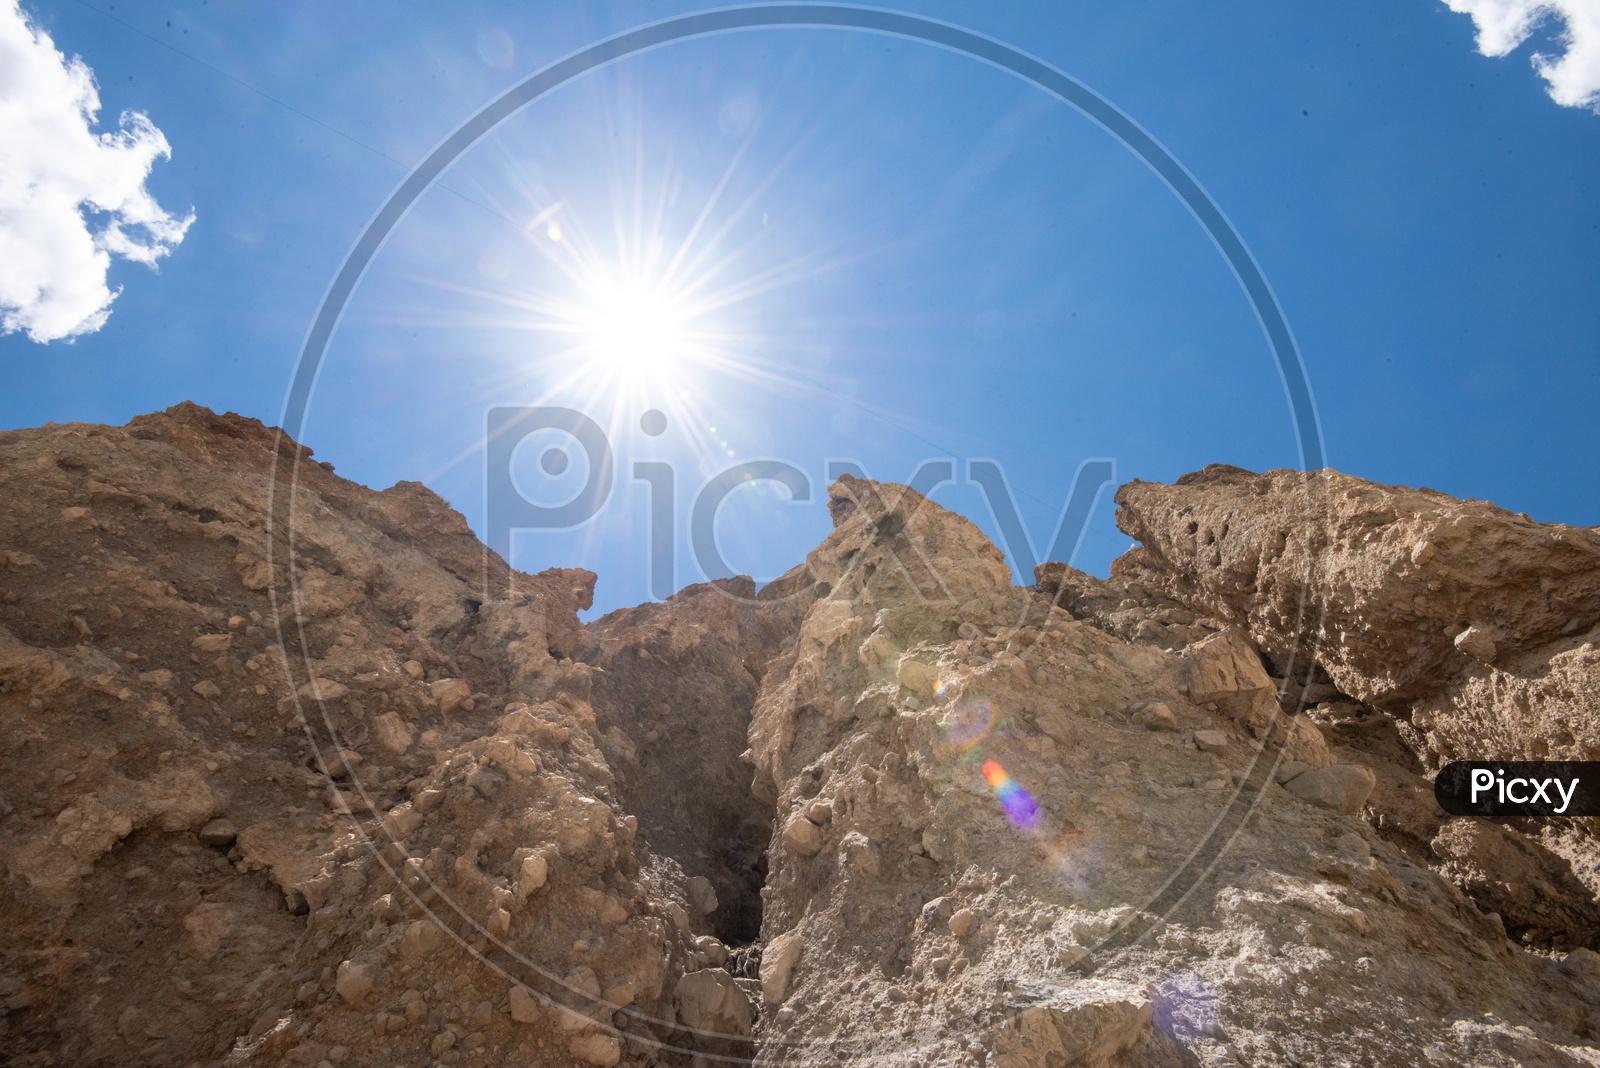 Terrain Badlands with a View of Blue Sky and Cotton Clouds